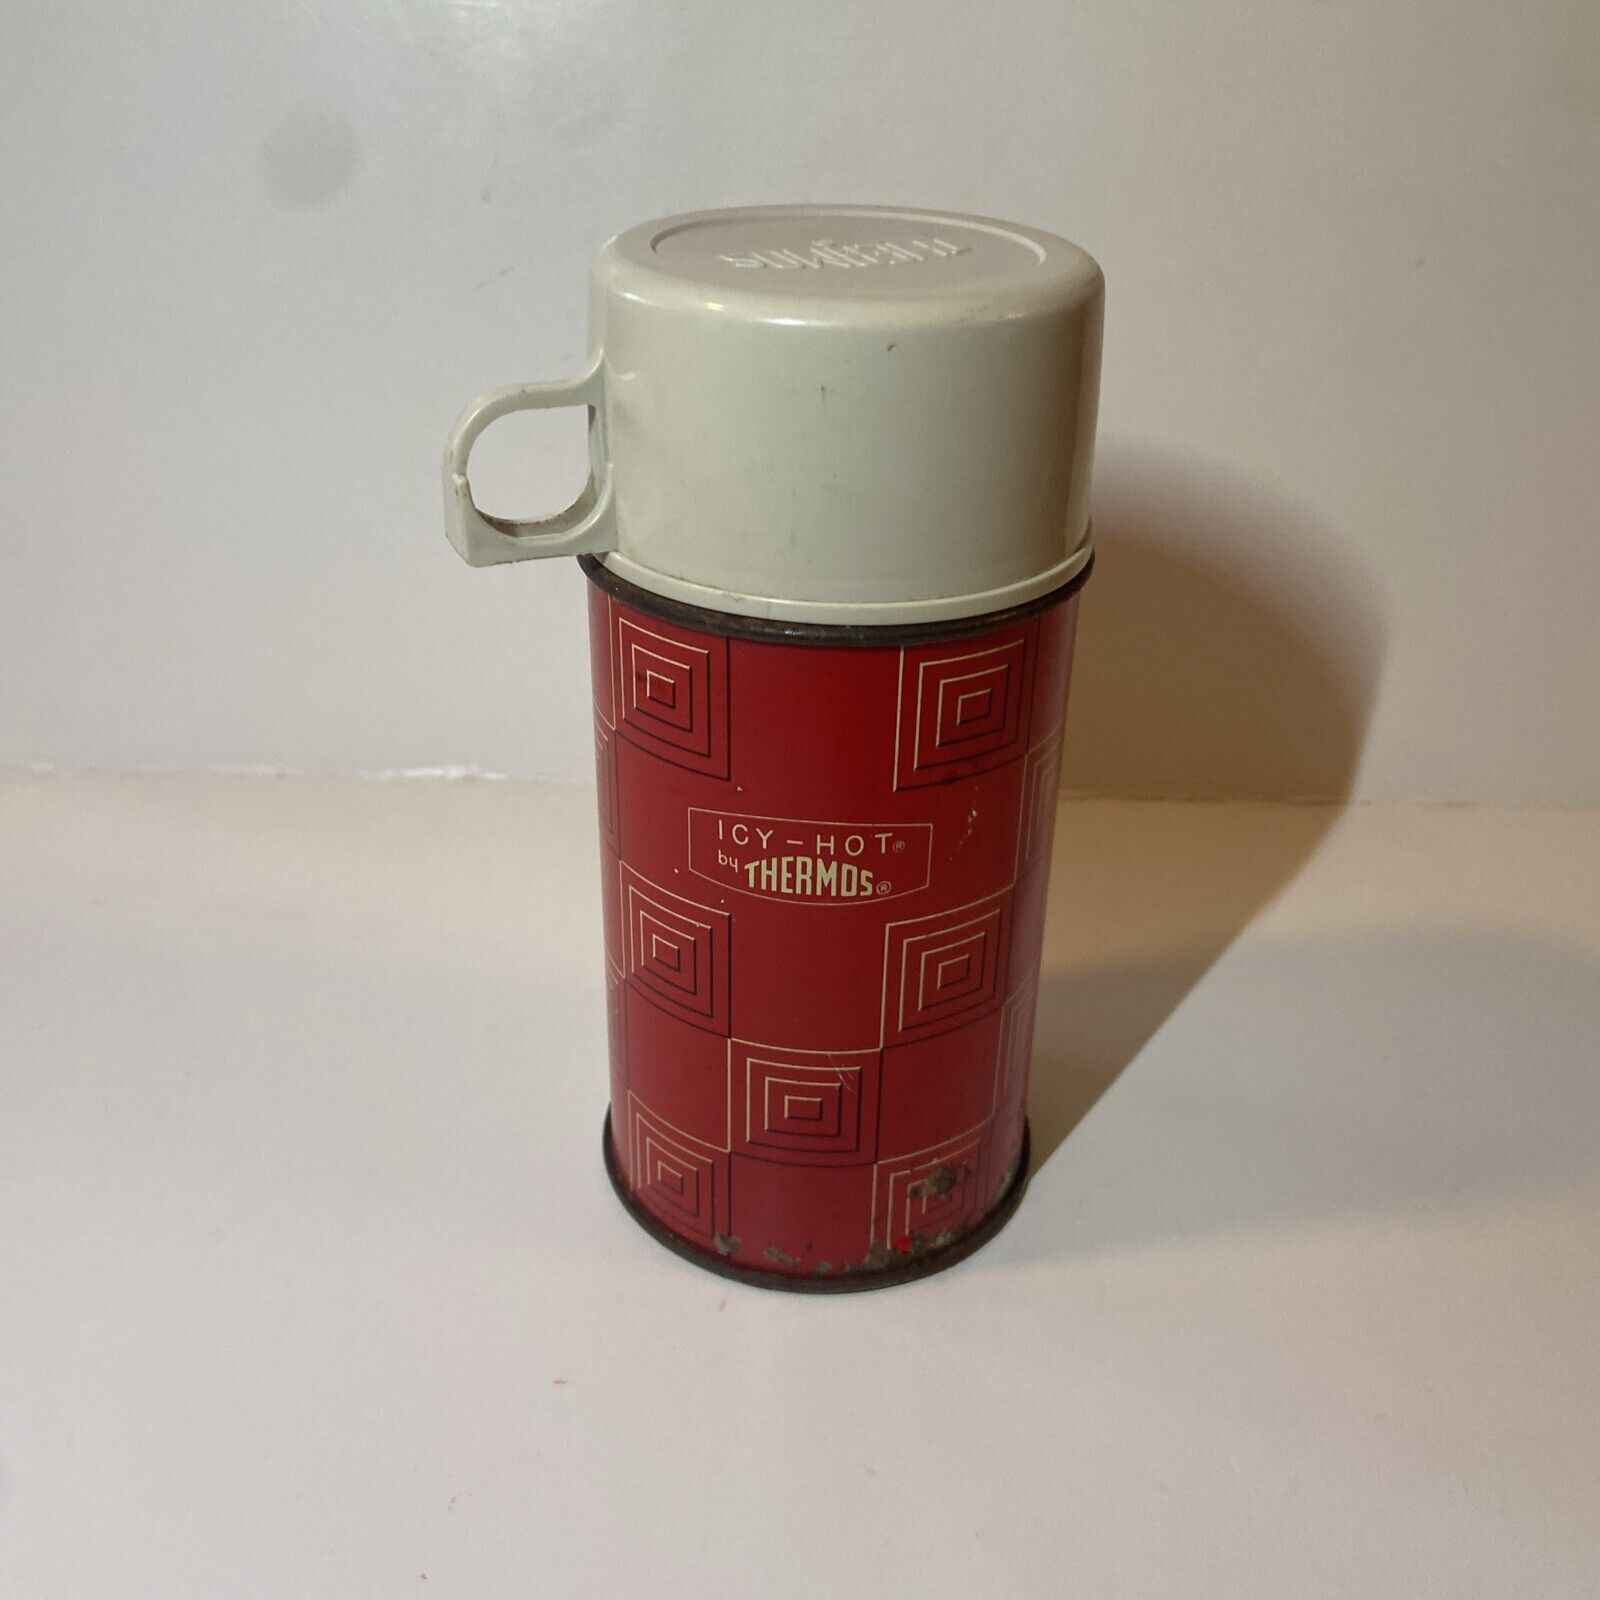 Thermos Icy-Hot Bottle Red & Black Retro Geometric Design ~ Vintage 1963